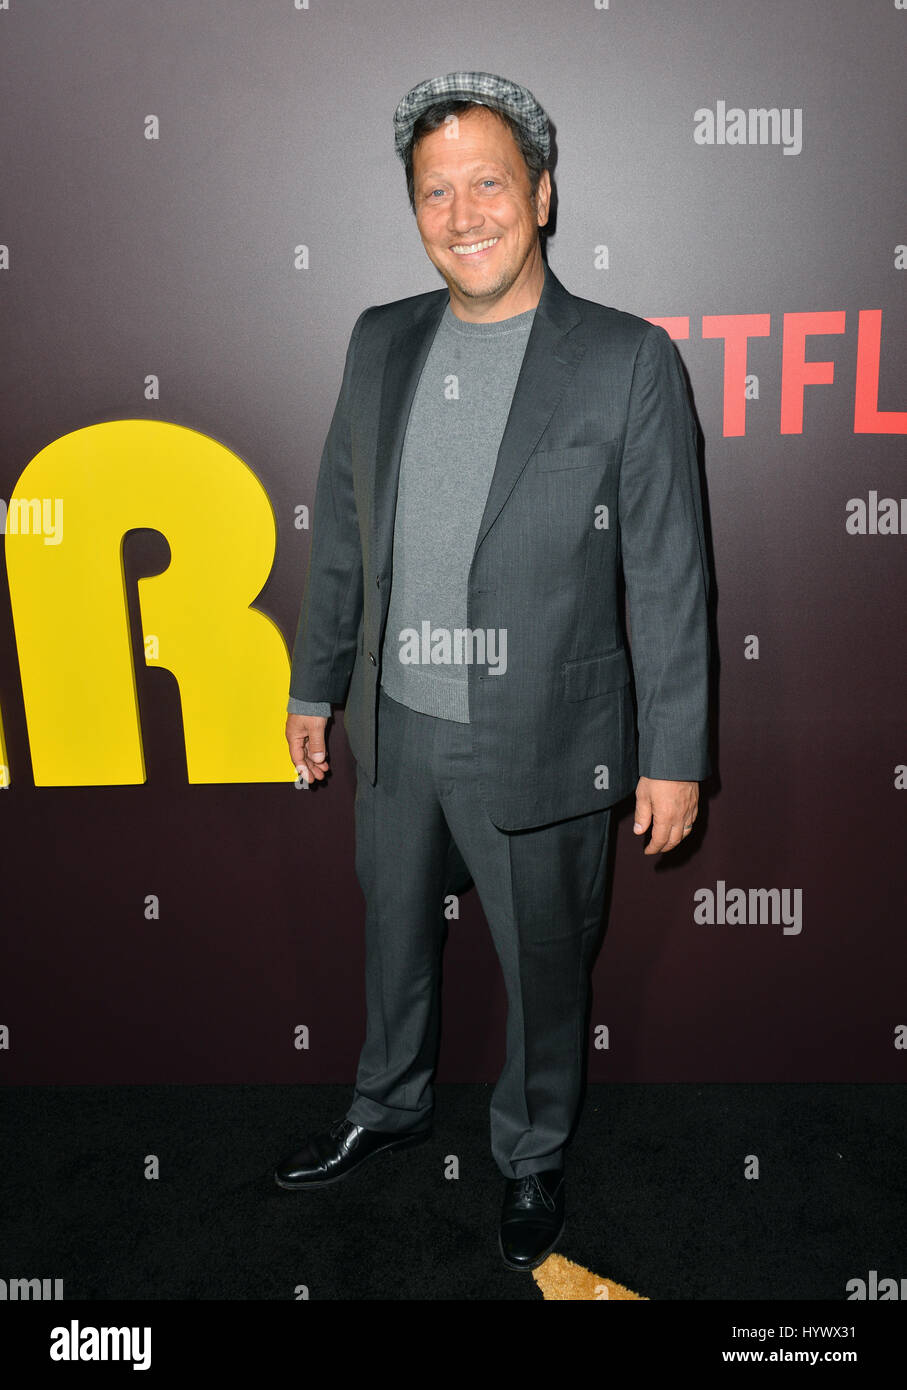 Los Angeles, USA. 06th Apr, 2017. Actor Rob Schneider at the premiere for 'Sandy Wexler' at The Cinerama Dome, Hollywood. Picture Credit: Sarah Stewart/Alamy Live News Stock Photo